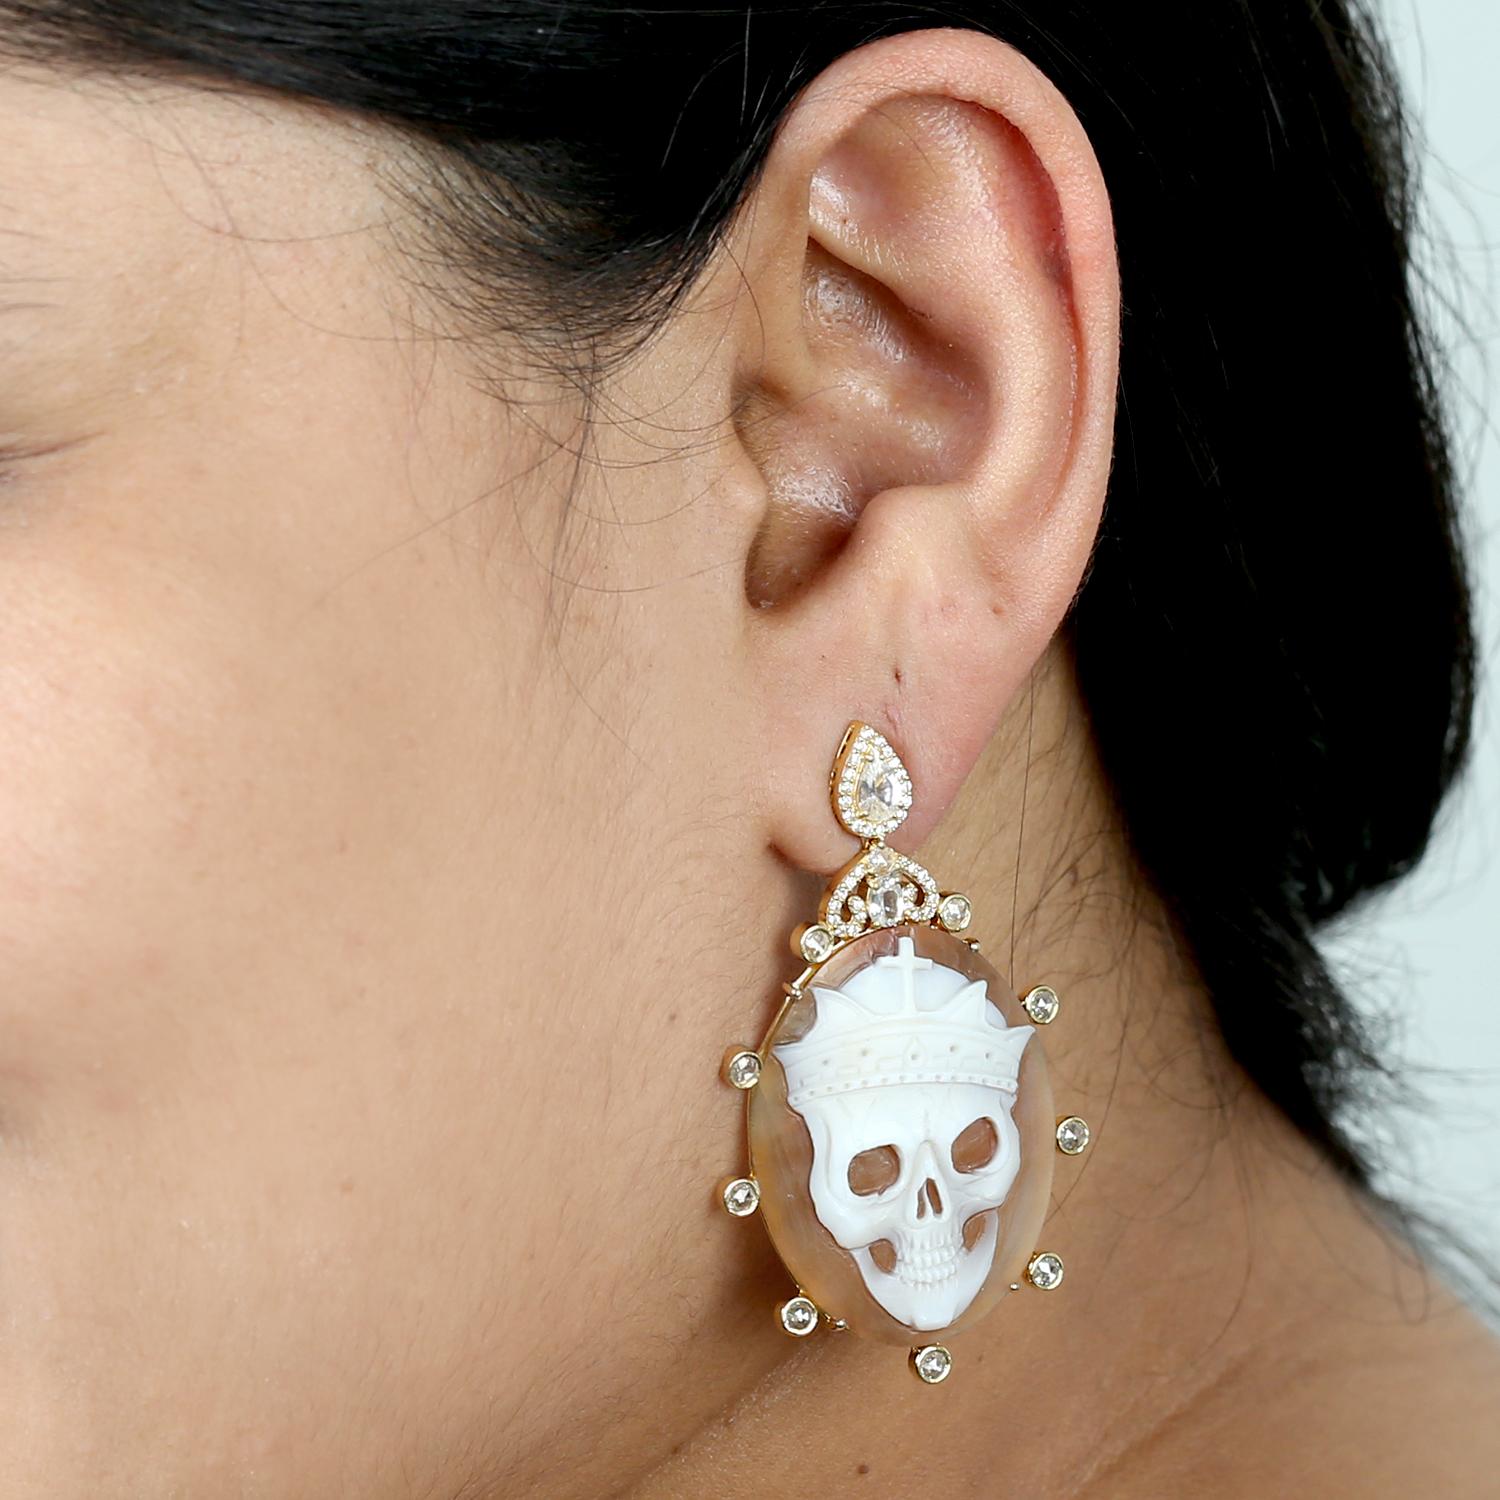 Contemporary Reaper Carved On Sardonyx Earrings Accented With Sapphire & Diamonds For Sale